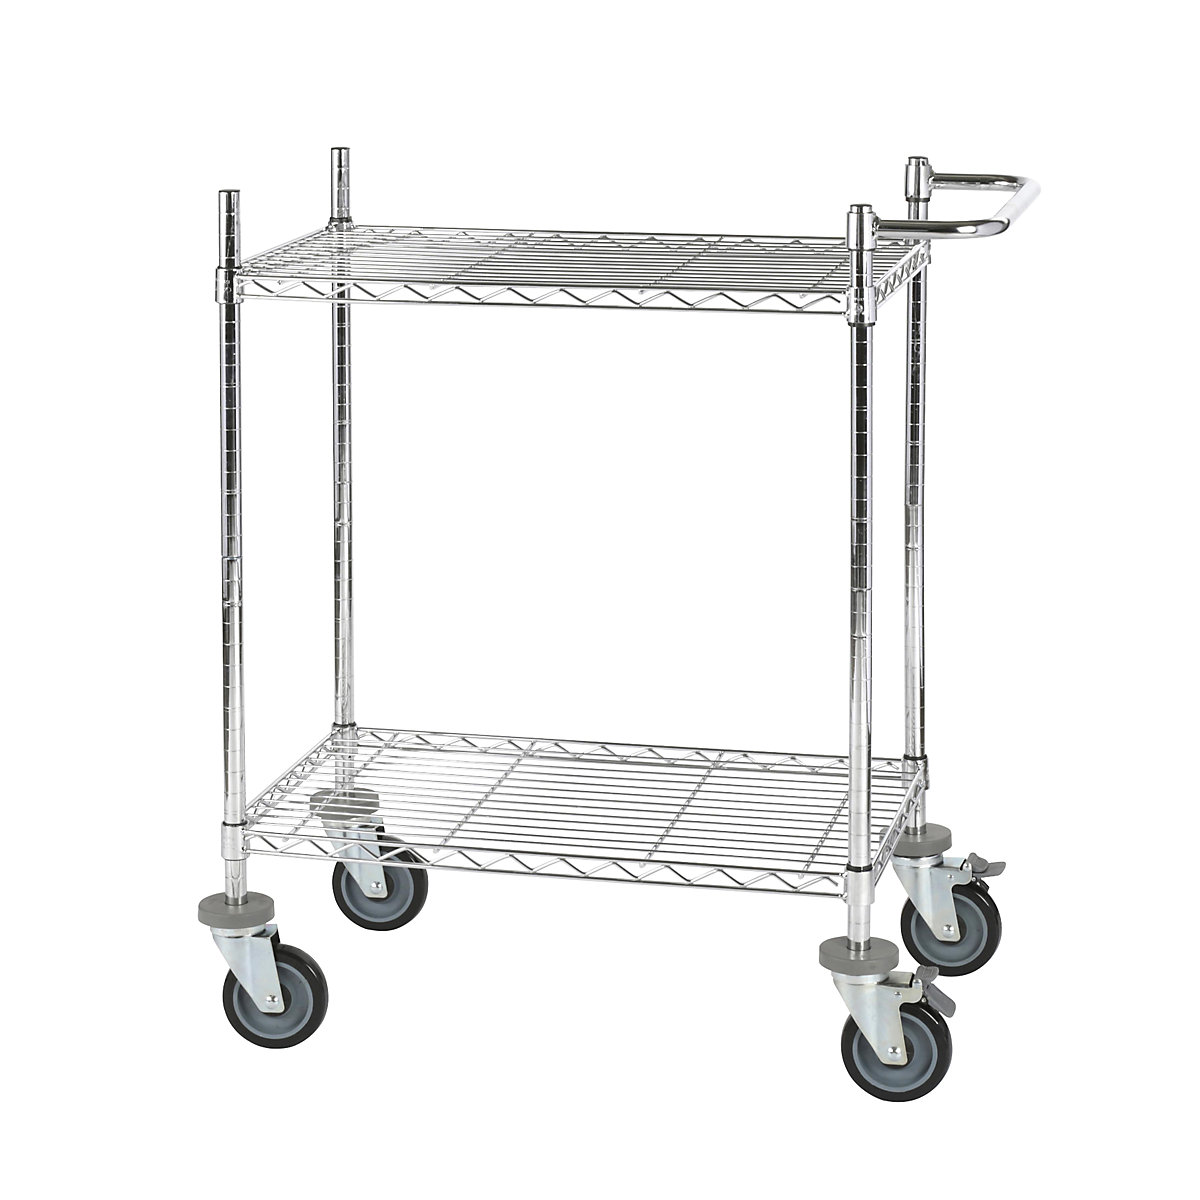 Wire mesh table trolley, chrome plated, with 2 shelves, LxWxH 760 x 460 x 1025 mm-1